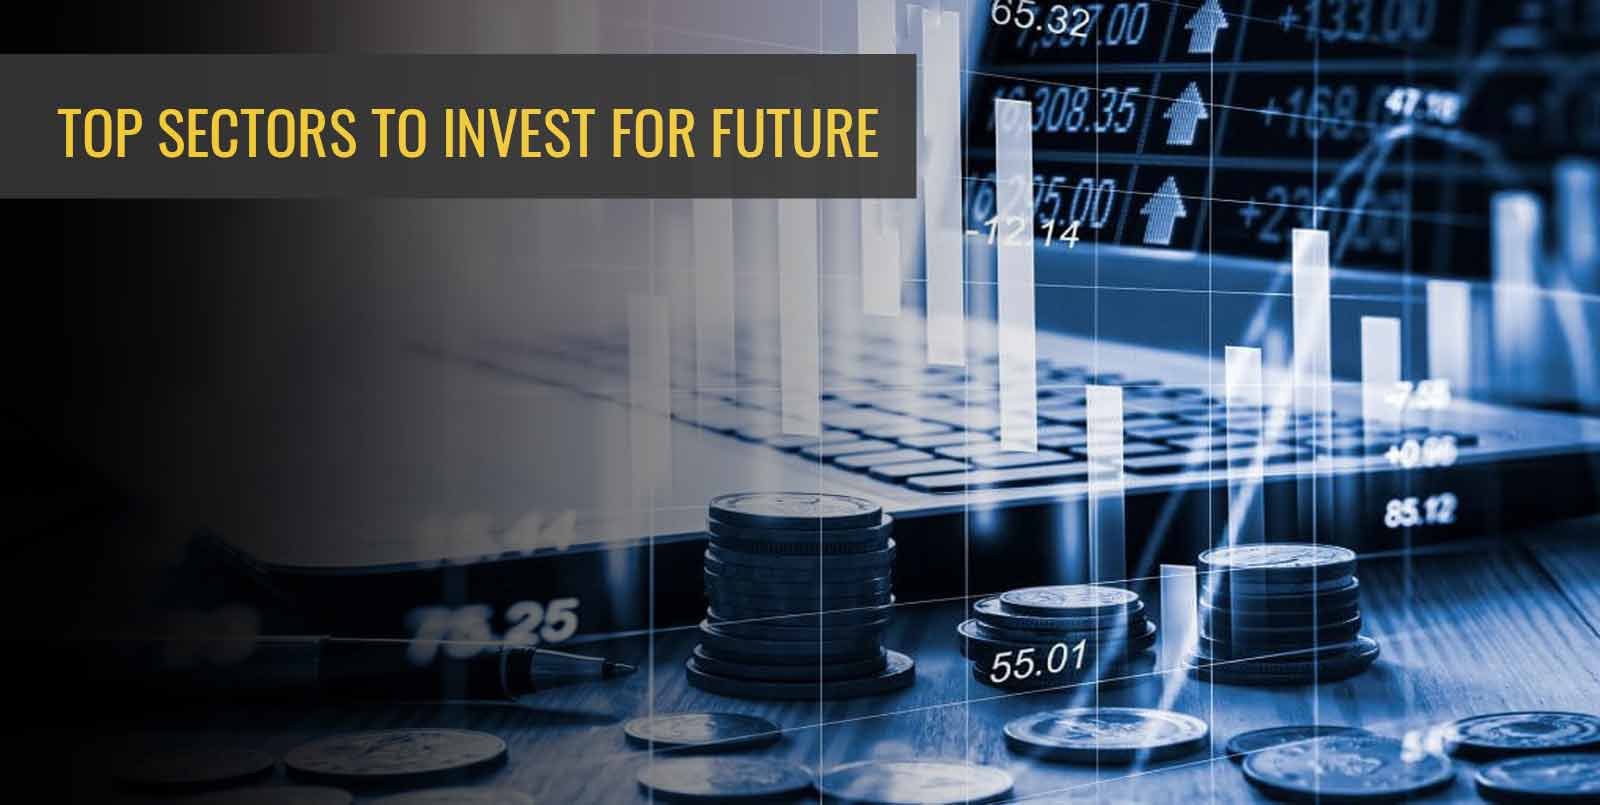 TOP SECTORS TO INVEST FOR THE FUTURE